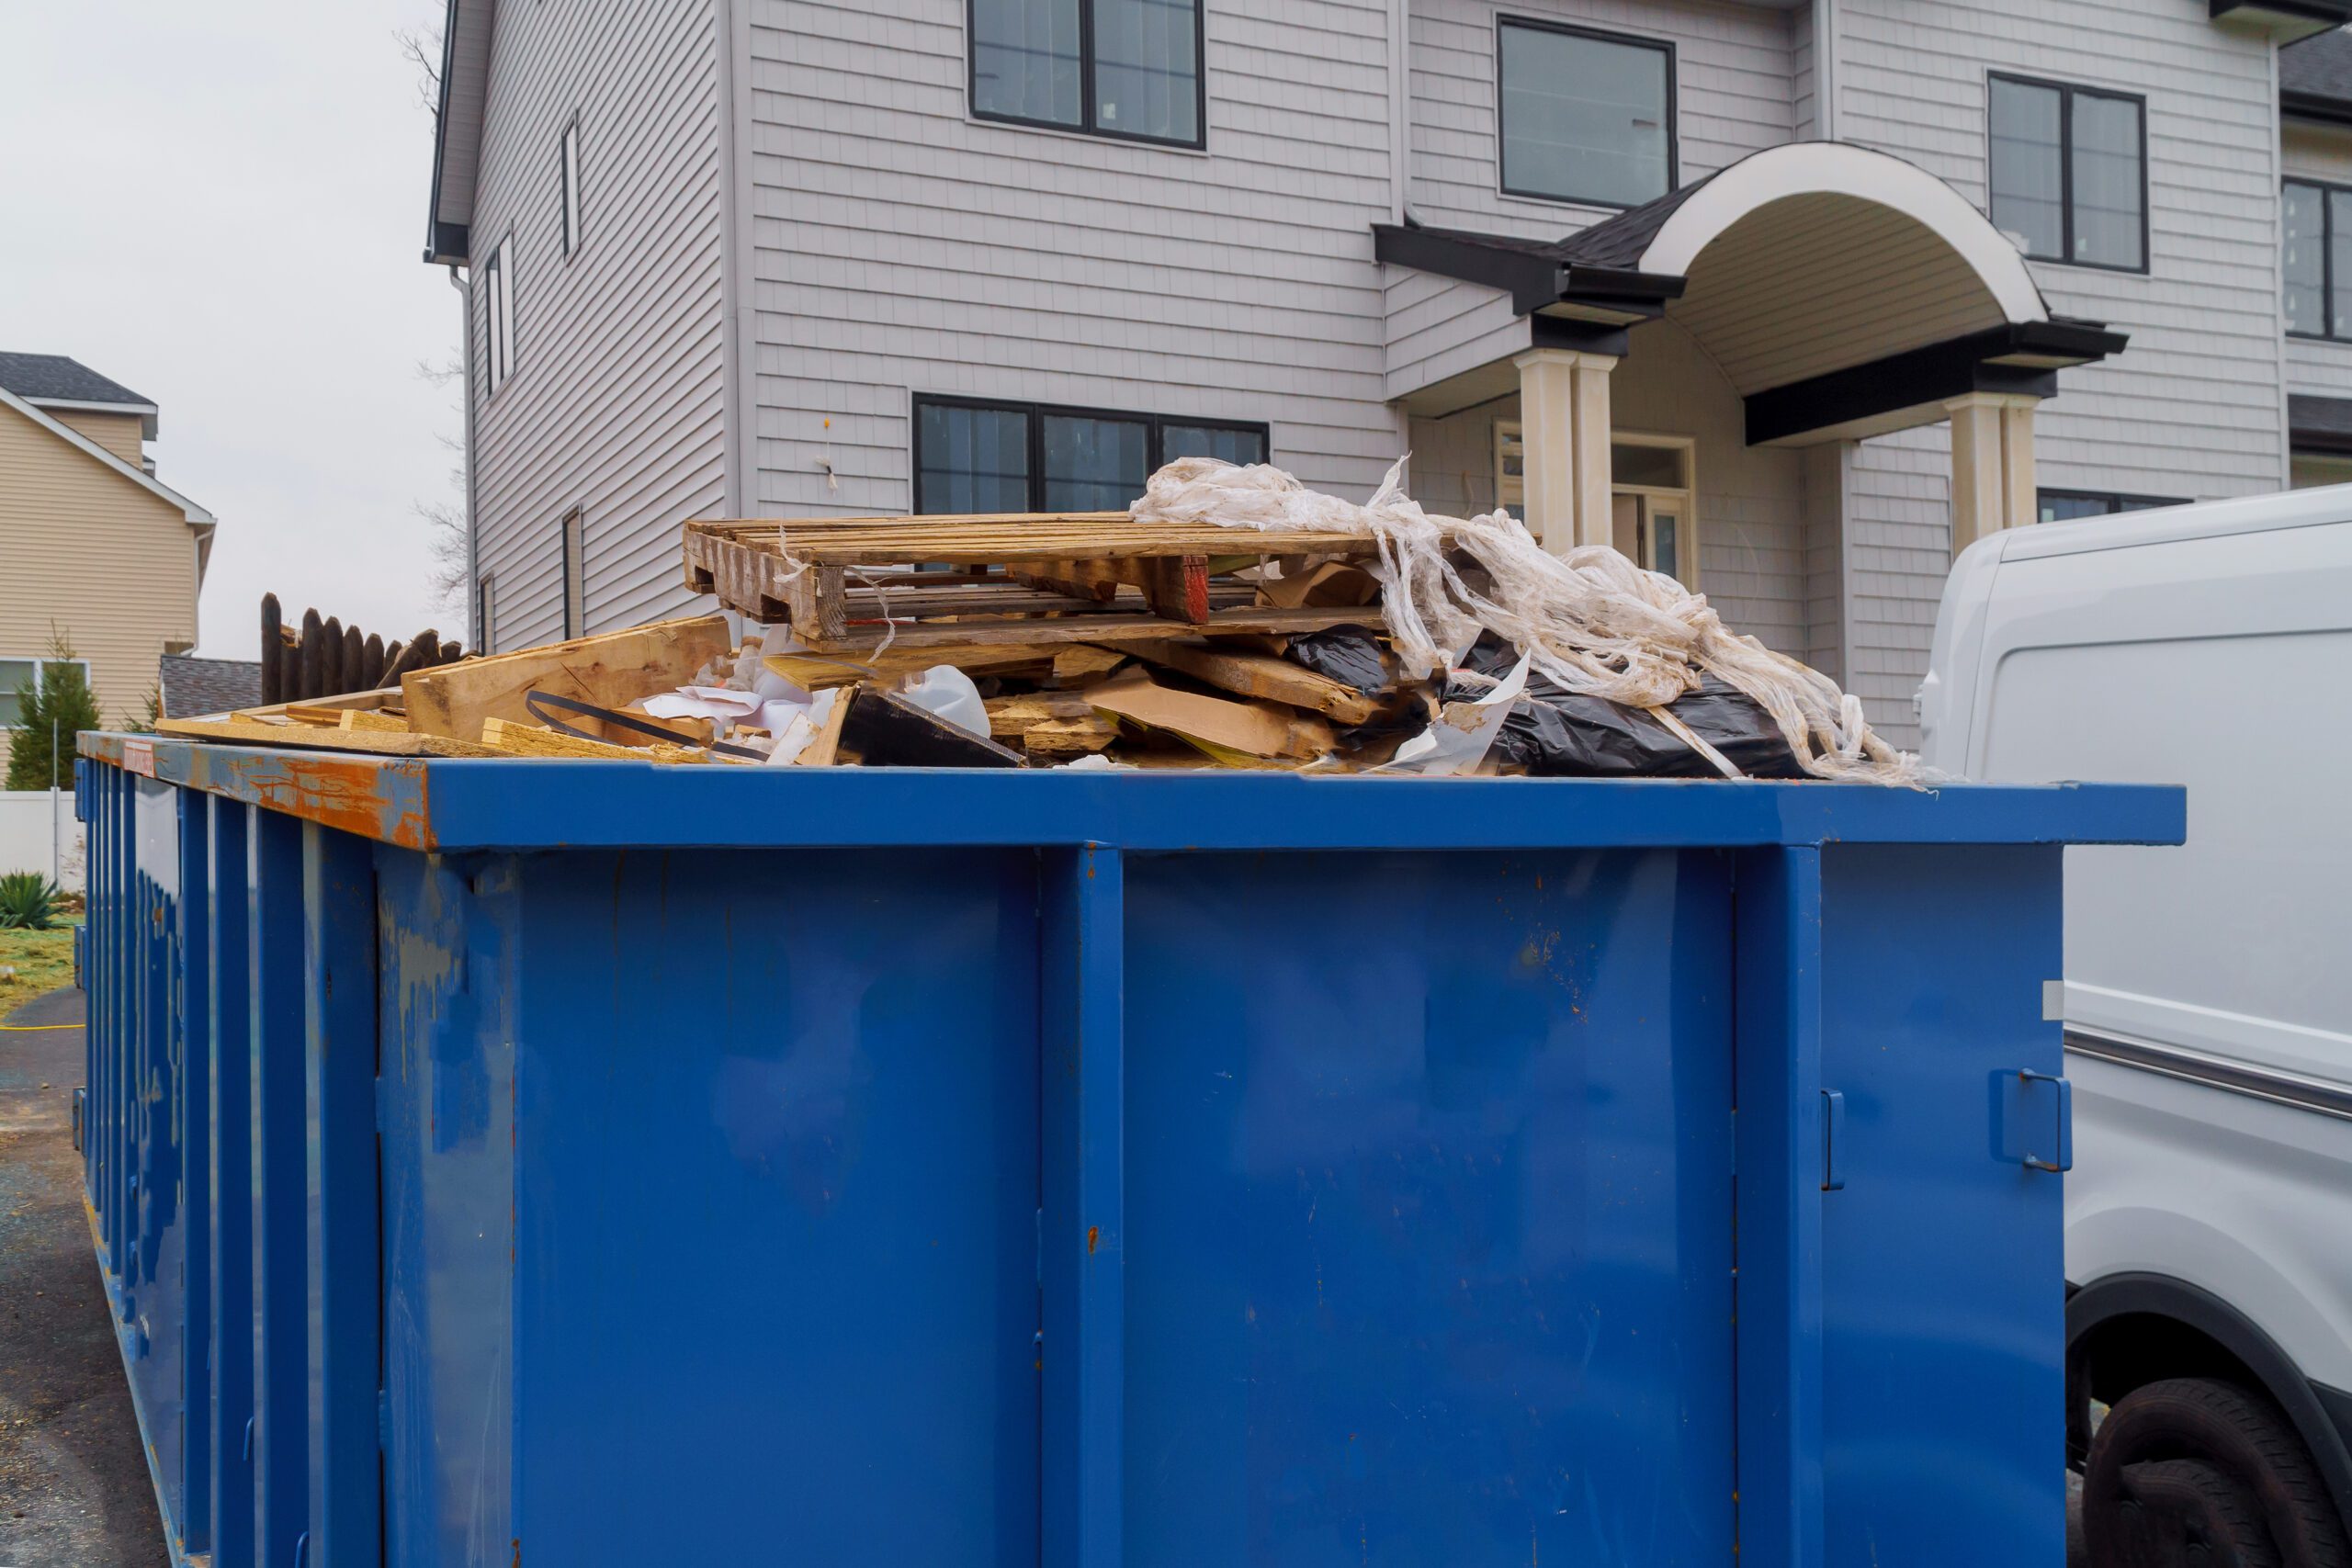 Roll off dumpster removal for residential clean up and debris projects at Hutchinson Dumpster Rental